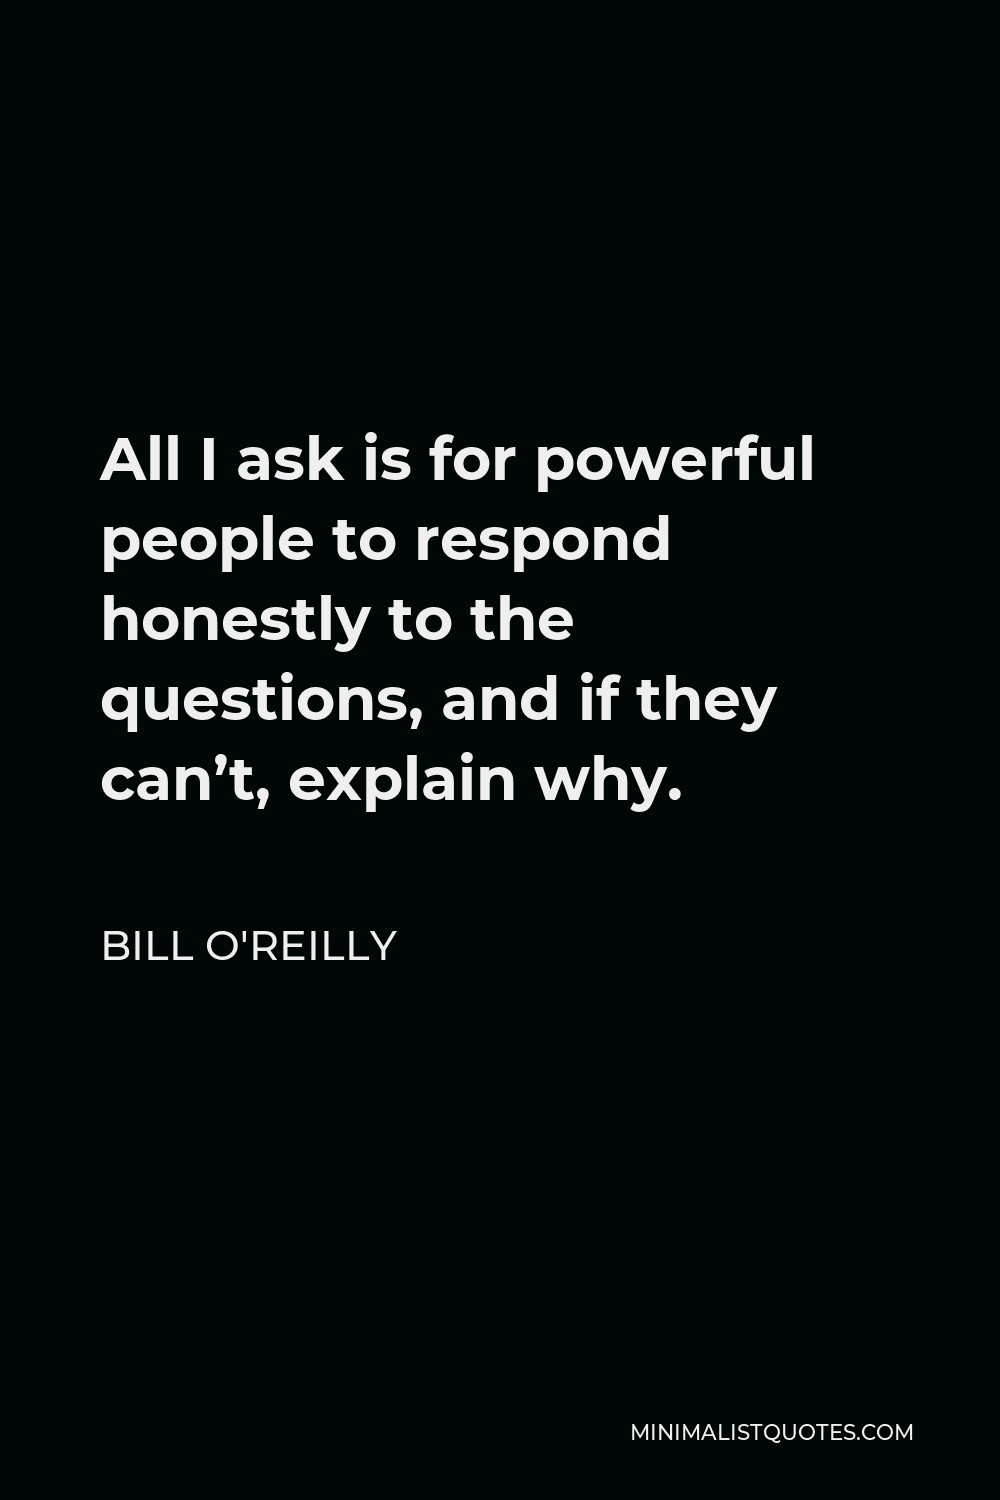 Bill O'Reilly Quote - All I ask is for powerful people to respond honestly to the questions, and if they can’t, explain why.